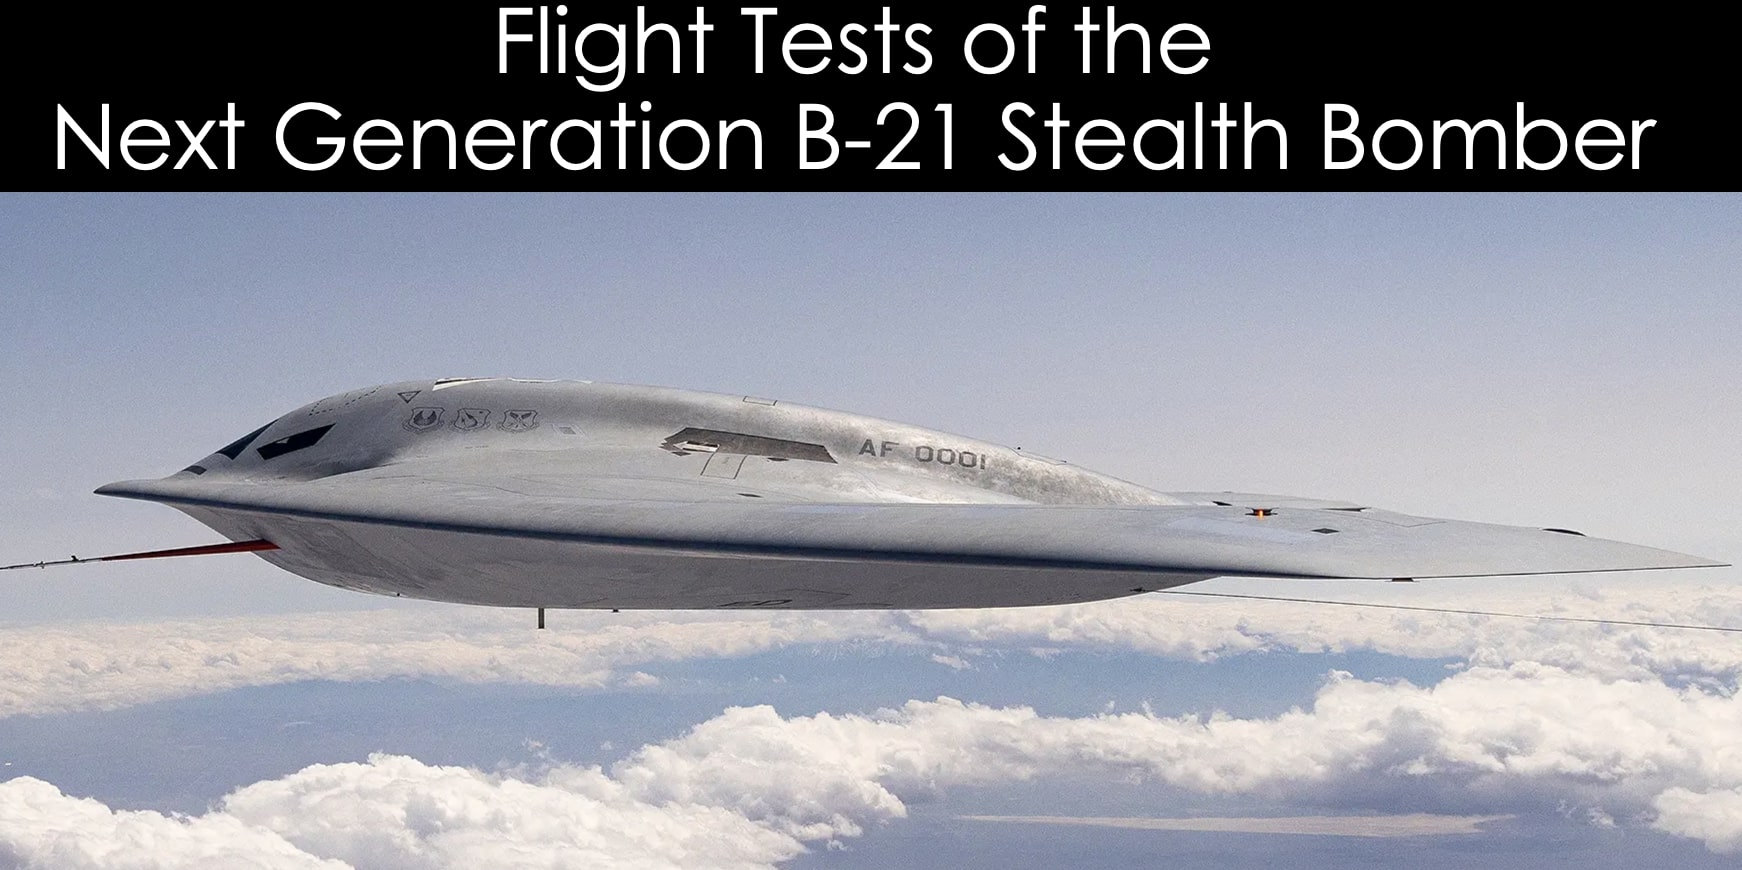 More Flight Tests of the Next Generation B-21 Stealth Bomber